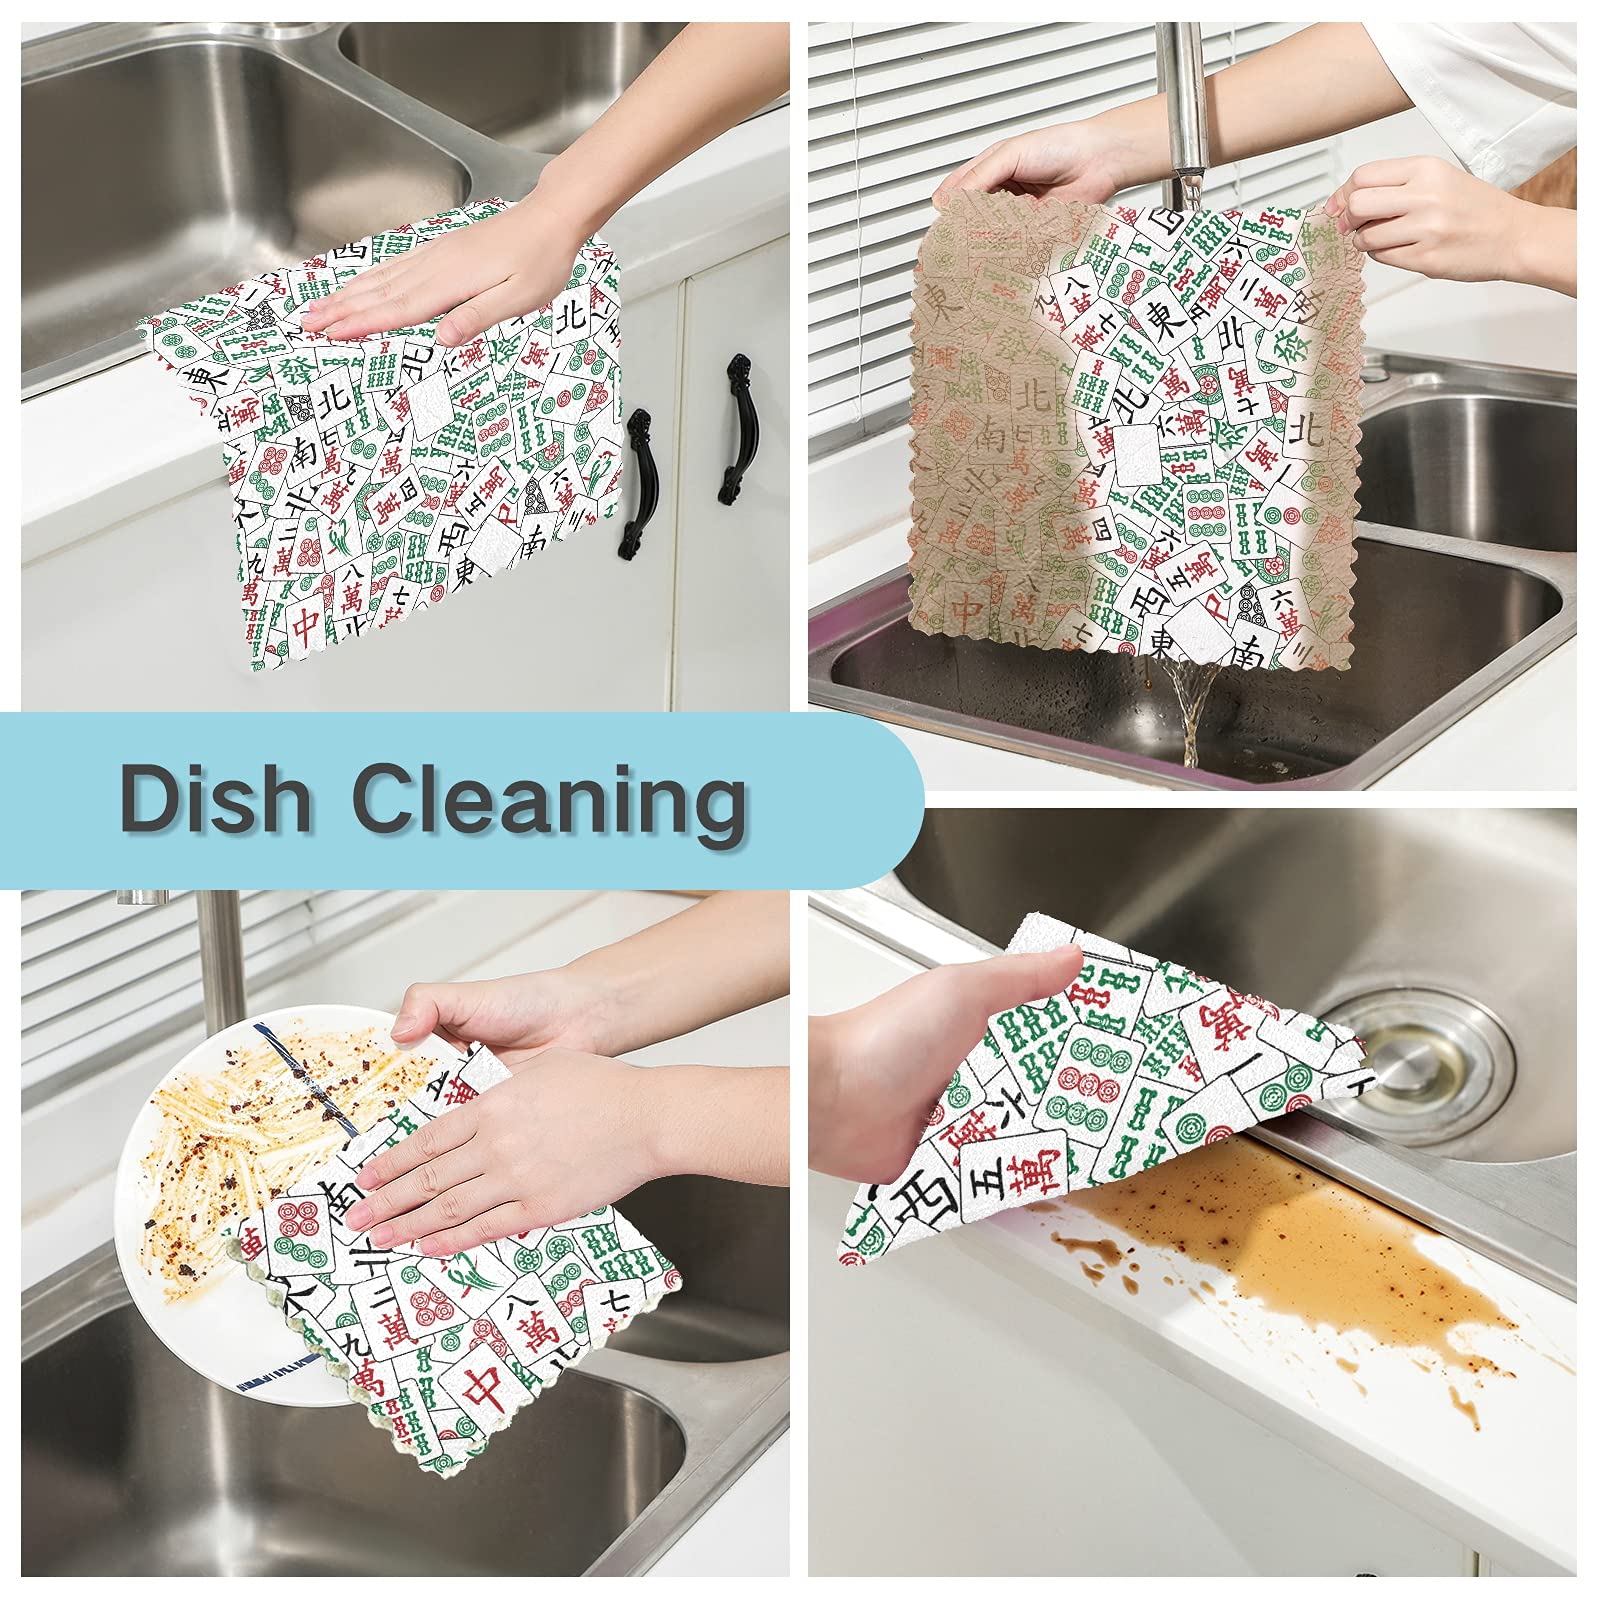 KLL Mahjong Kitchen Dishcloths Set of 6 Cleaning Towels for Drying Dishes Scrubbing Wash Cloth for Sink Cooking Baking Table 11 x 11 in